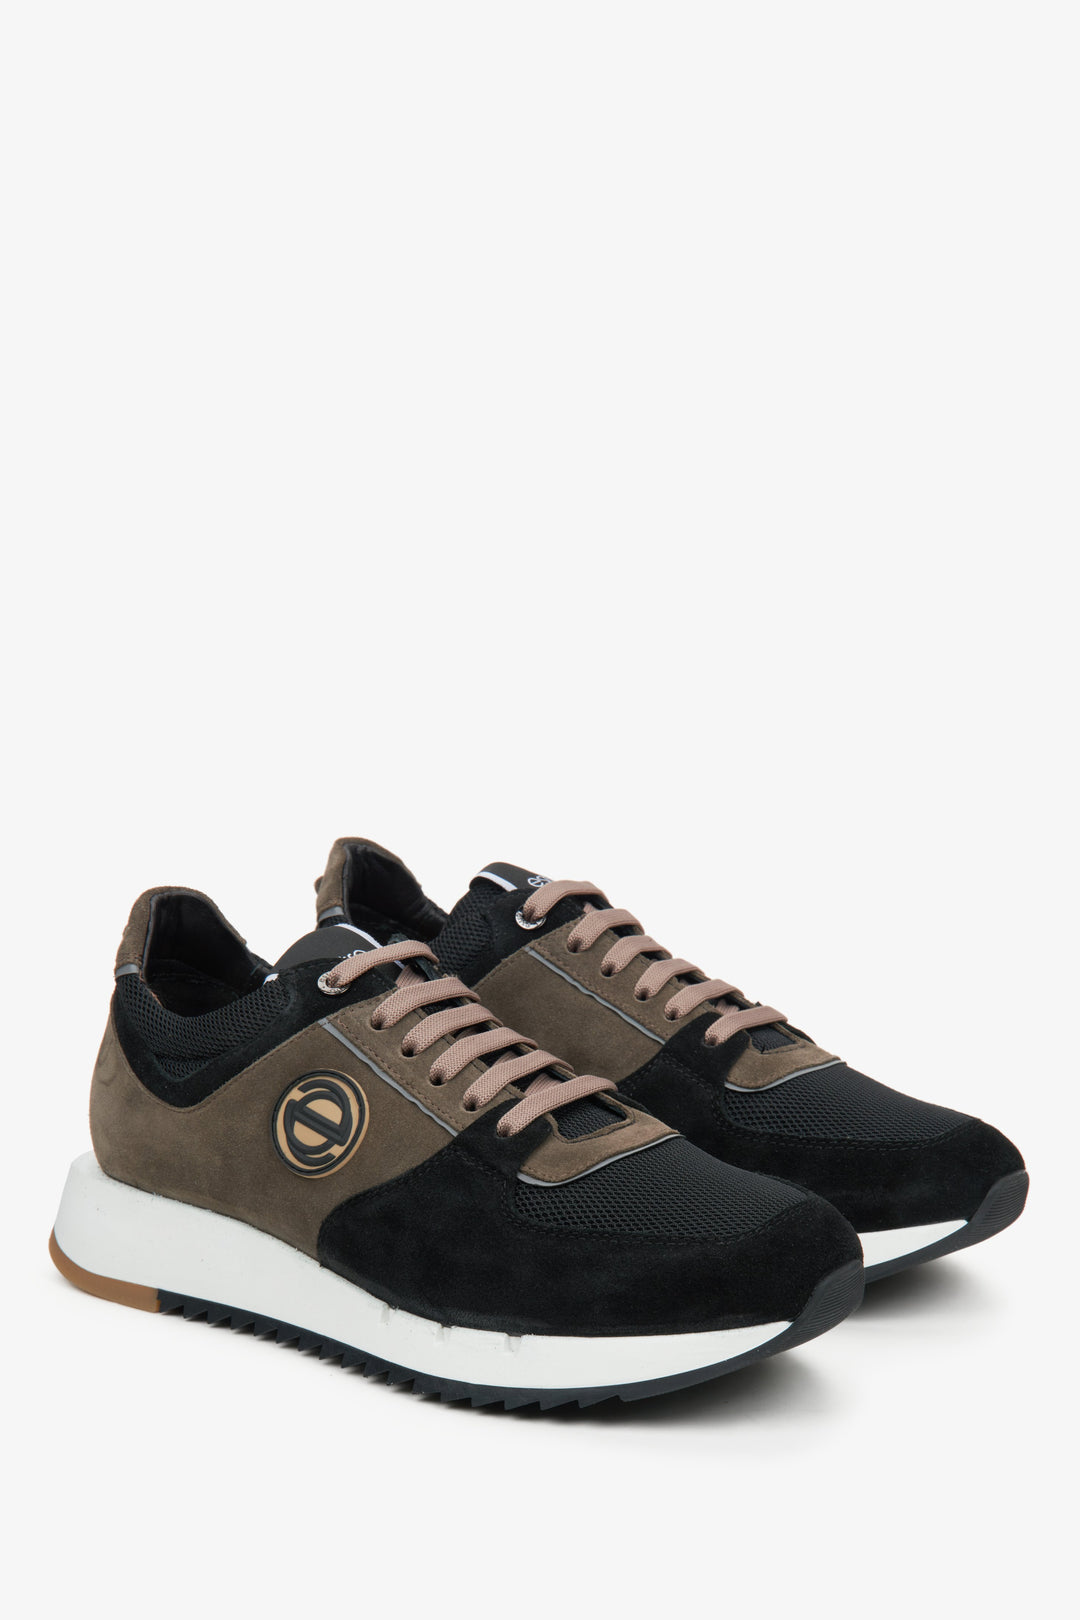 Men's black and brown velour sneakers by Estro.